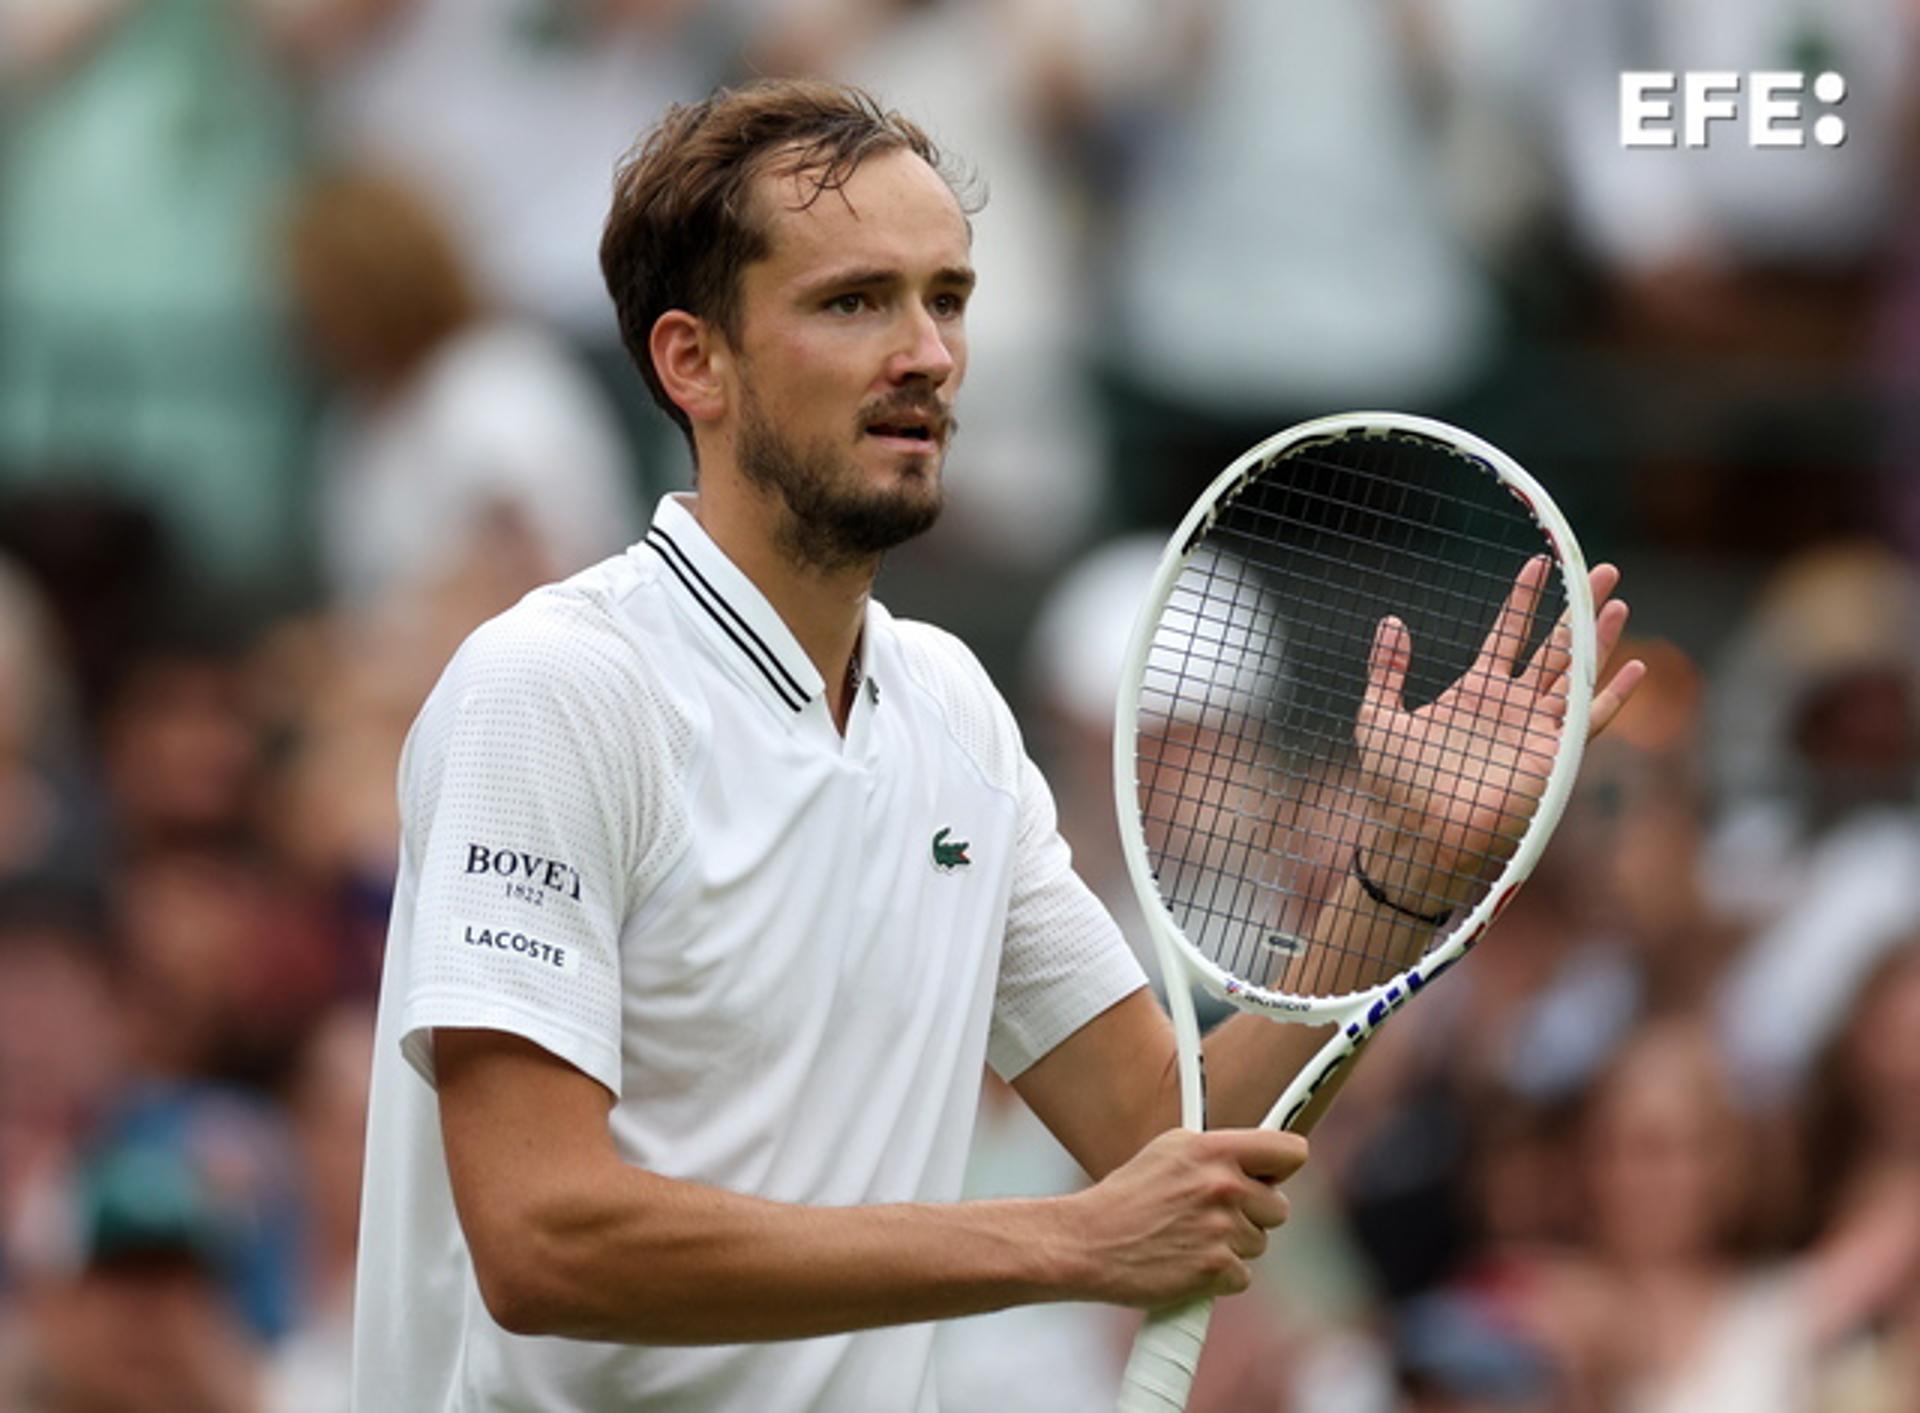 Daniil Medvedev celebrates winning his 3rd round match against Marton Fucsovics at the Wimbledon Championships in London on 8 July 2023. EFE/EPA/ISABEL INFANTES/ EDITORIAL USE ONLY
